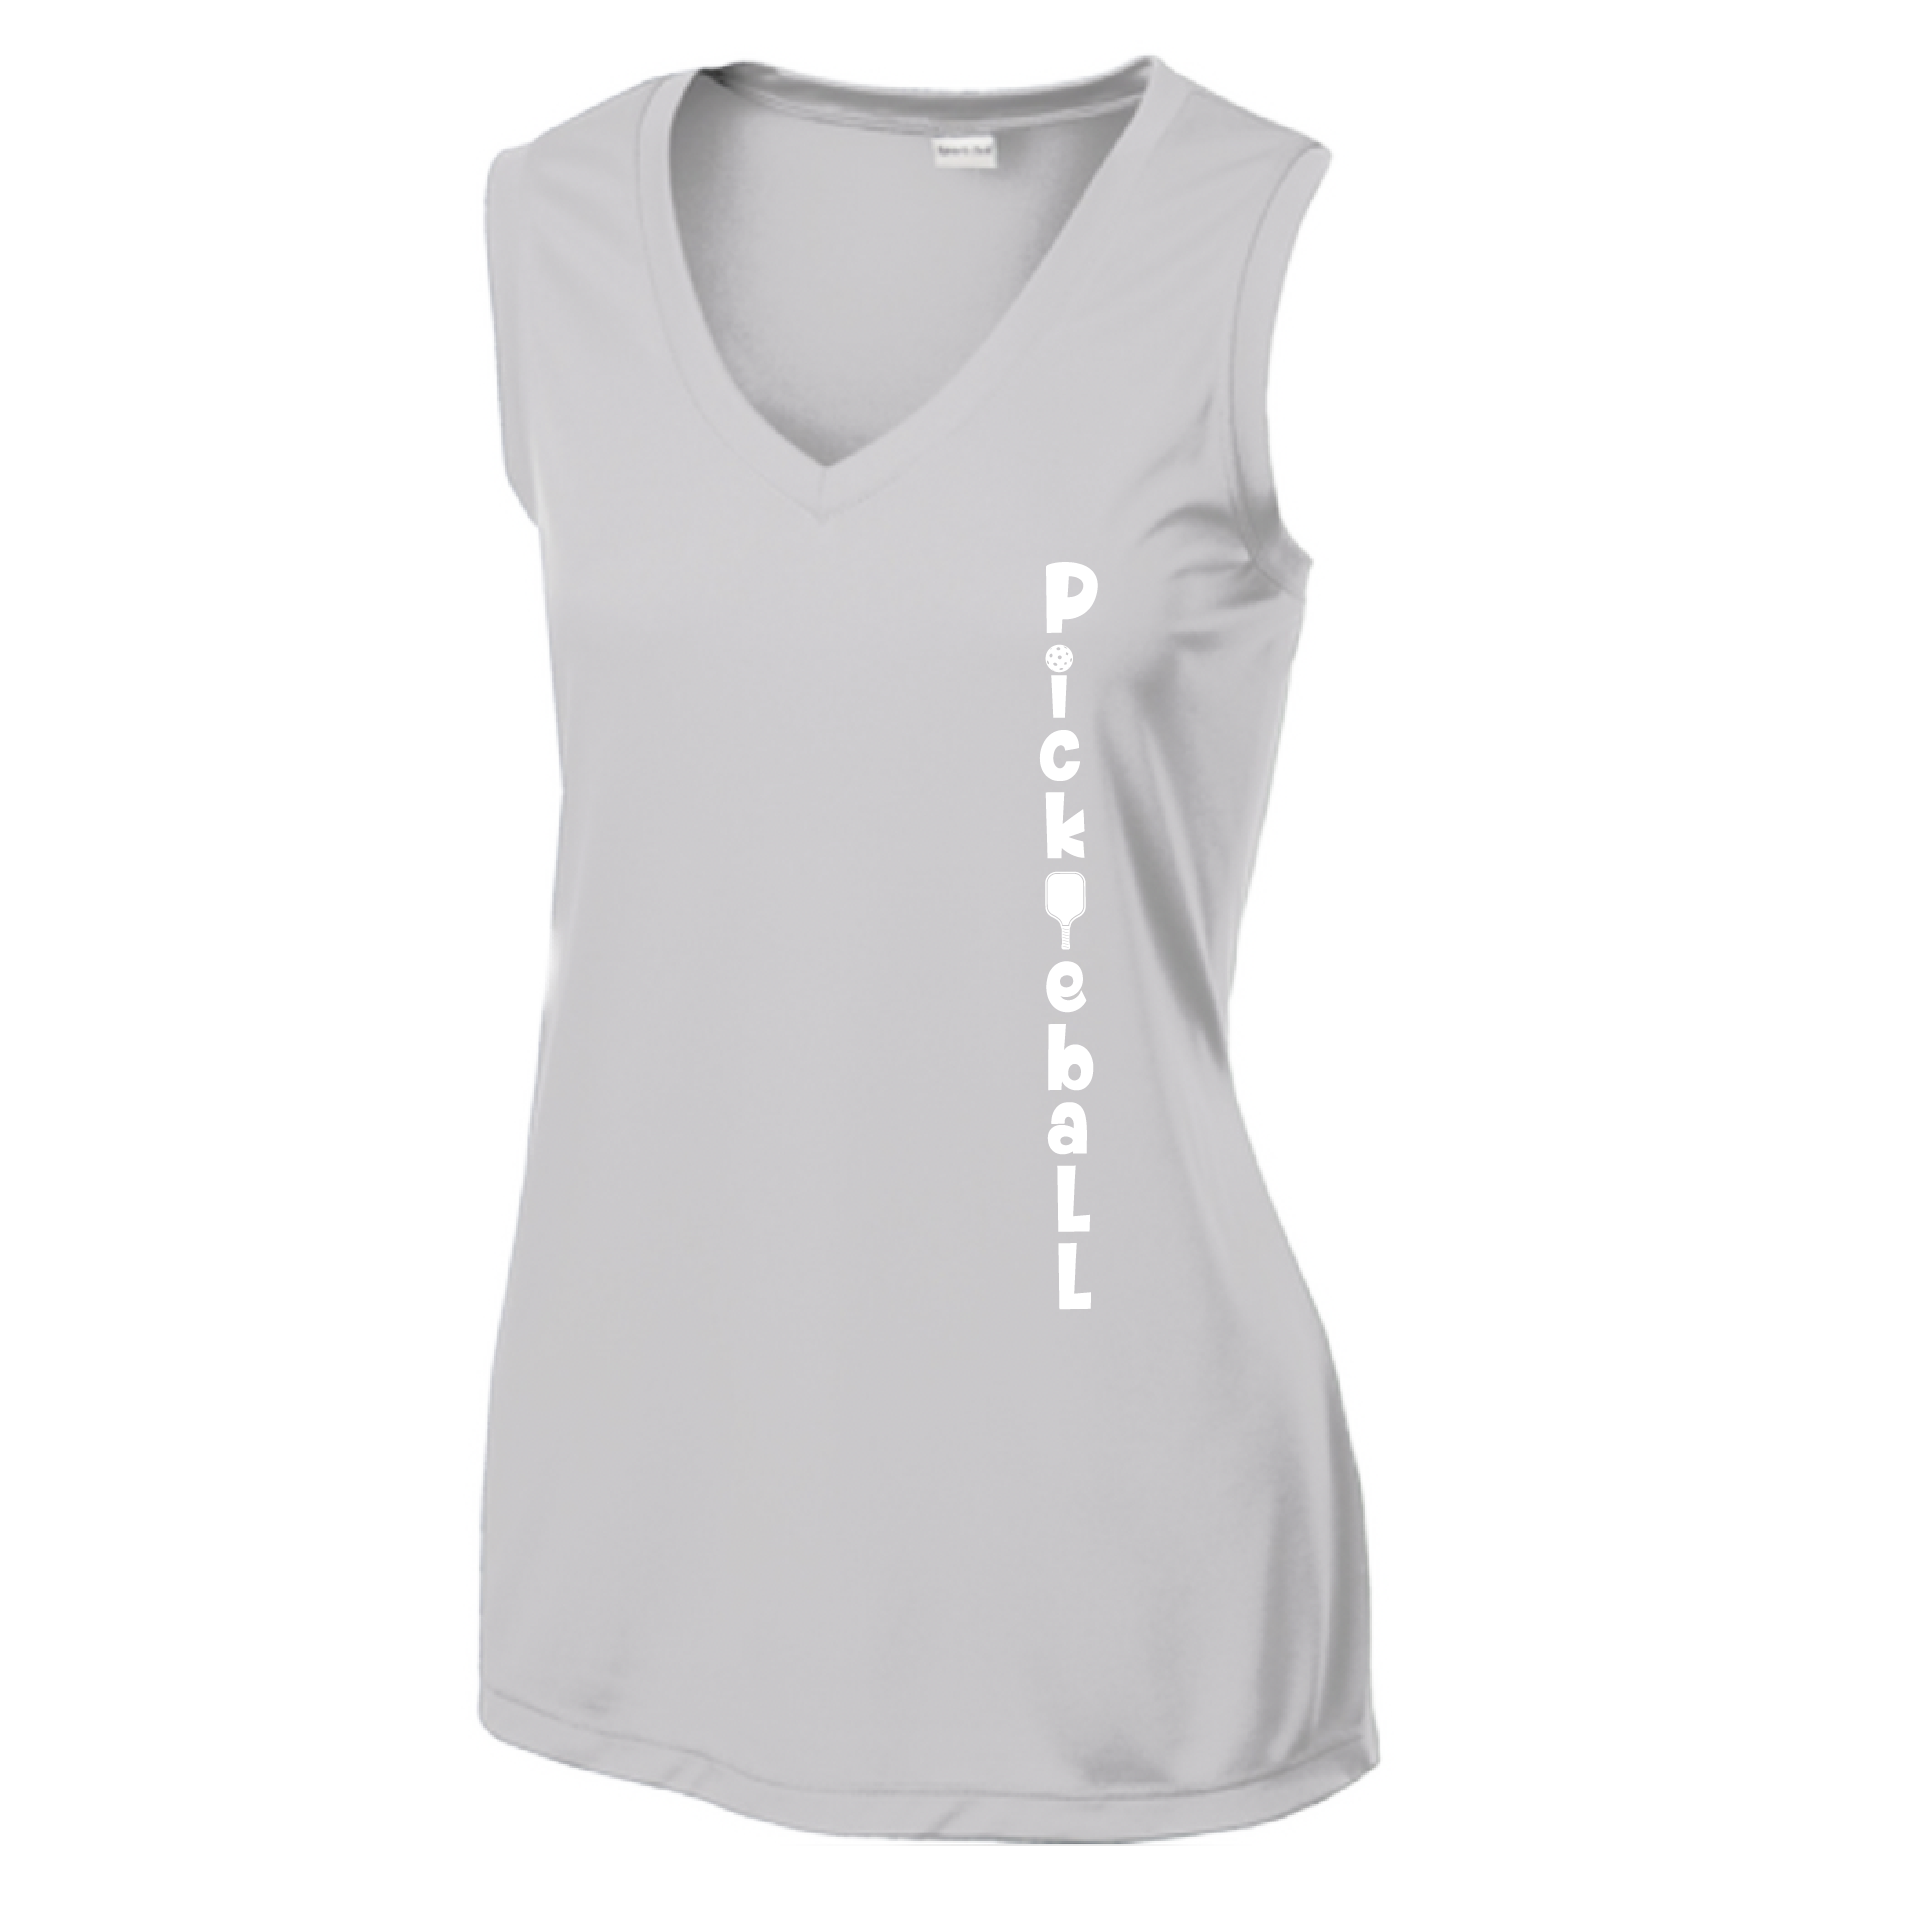 Pickleball Design: Pickleball Vertical Customizable Location  Women's Style: Sleeveless Tank  Shirts are lightweight, roomy and highly breathable. These moisture-wicking shirts are designed for athletic performance. They feature PosiCharge technology to lock in color and prevent logos from fading. Removable tag and set-in sleeves for comfort.